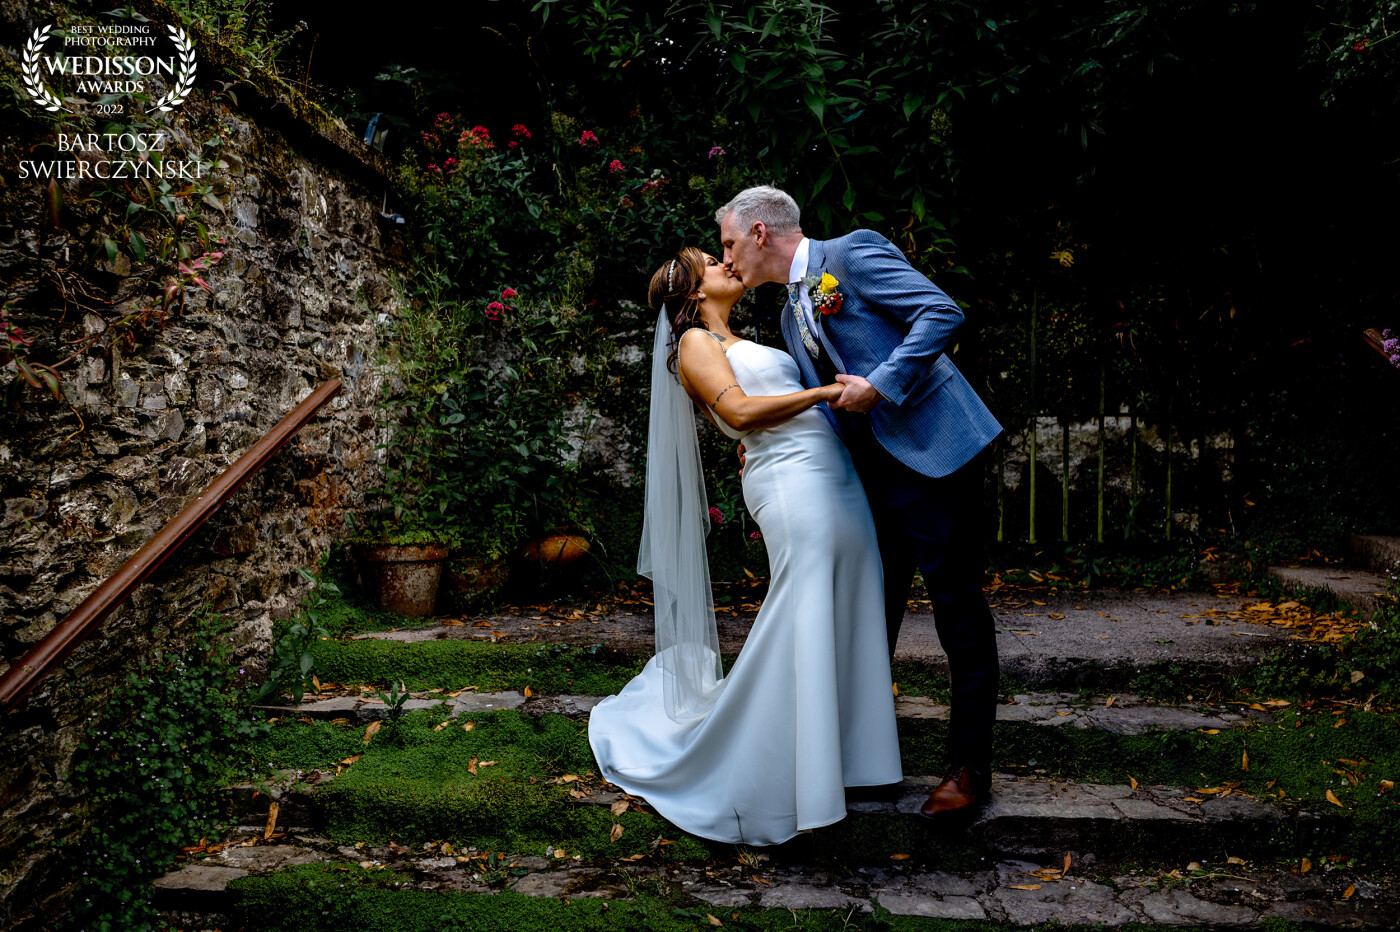 After very intimate wedding ceremony I took my couple for a short walk around grounds of stunning Barnabrow House in County Cork. While we were coming down the beautiful steps I just said 'Peter you may now kiss your bride' and he did it eagerly.